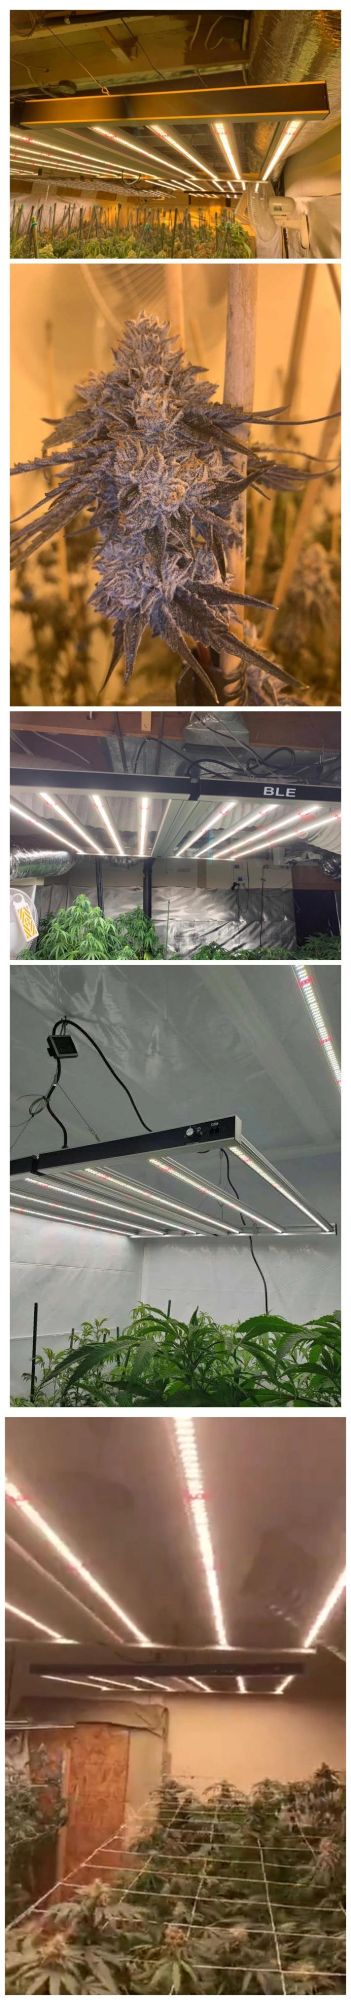 BLE 880W Dimmable Lm301h Adjustable Foldable LED Grow Light for Plants